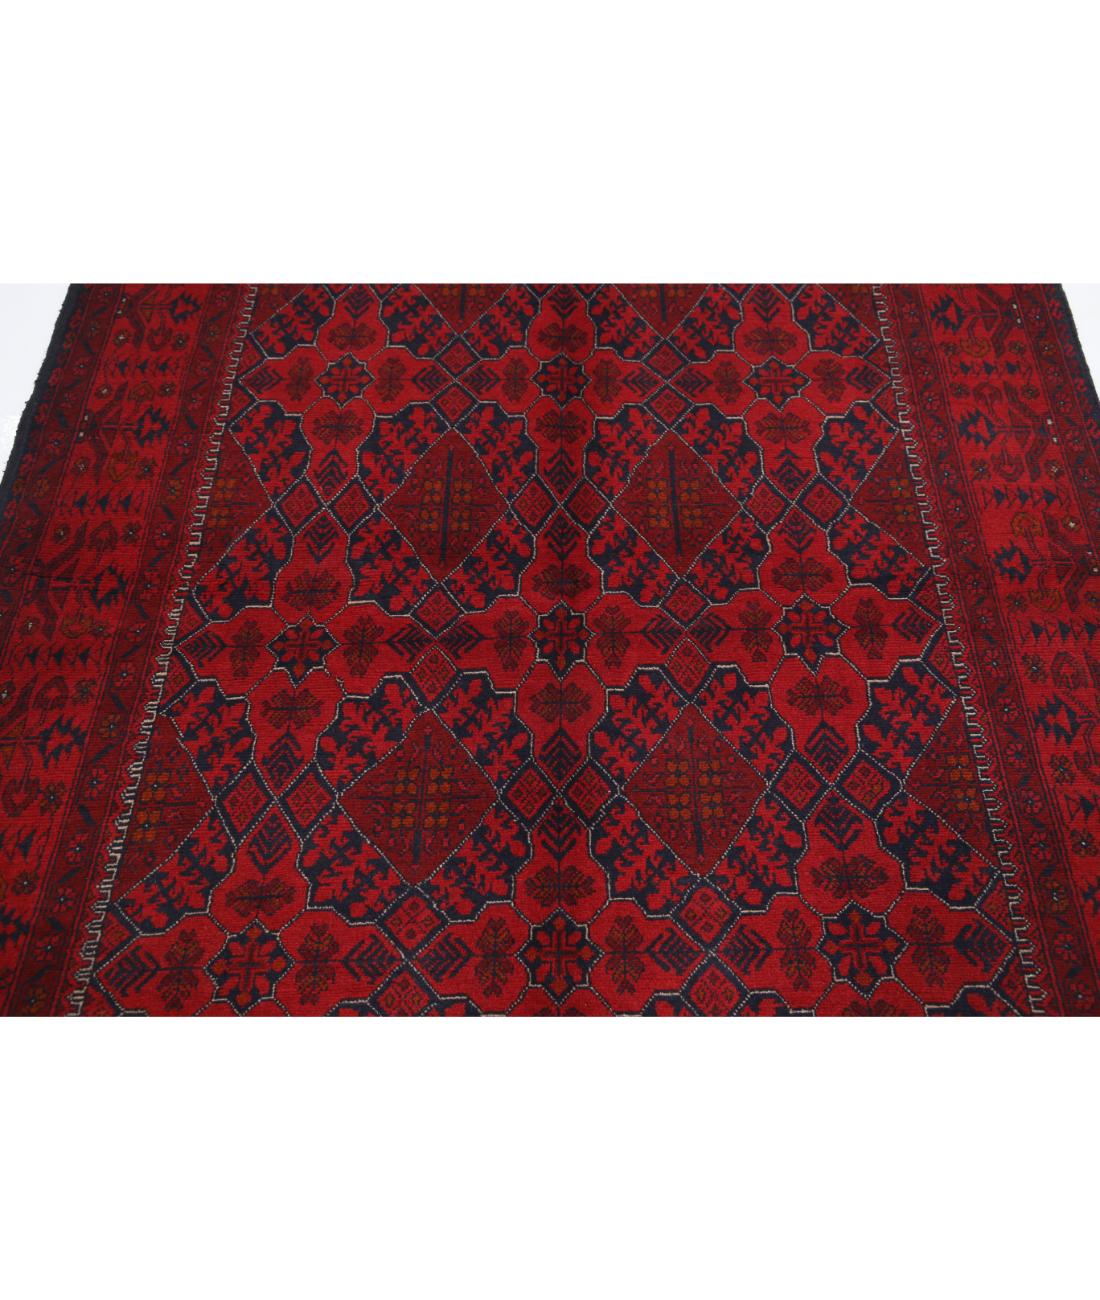 Hand Knotted Afghan Khal Muhammadi Wool Rug - 4'11'' x 6'6'' 4' 11" X 6' 6" (150 X 198) / Red / Blue